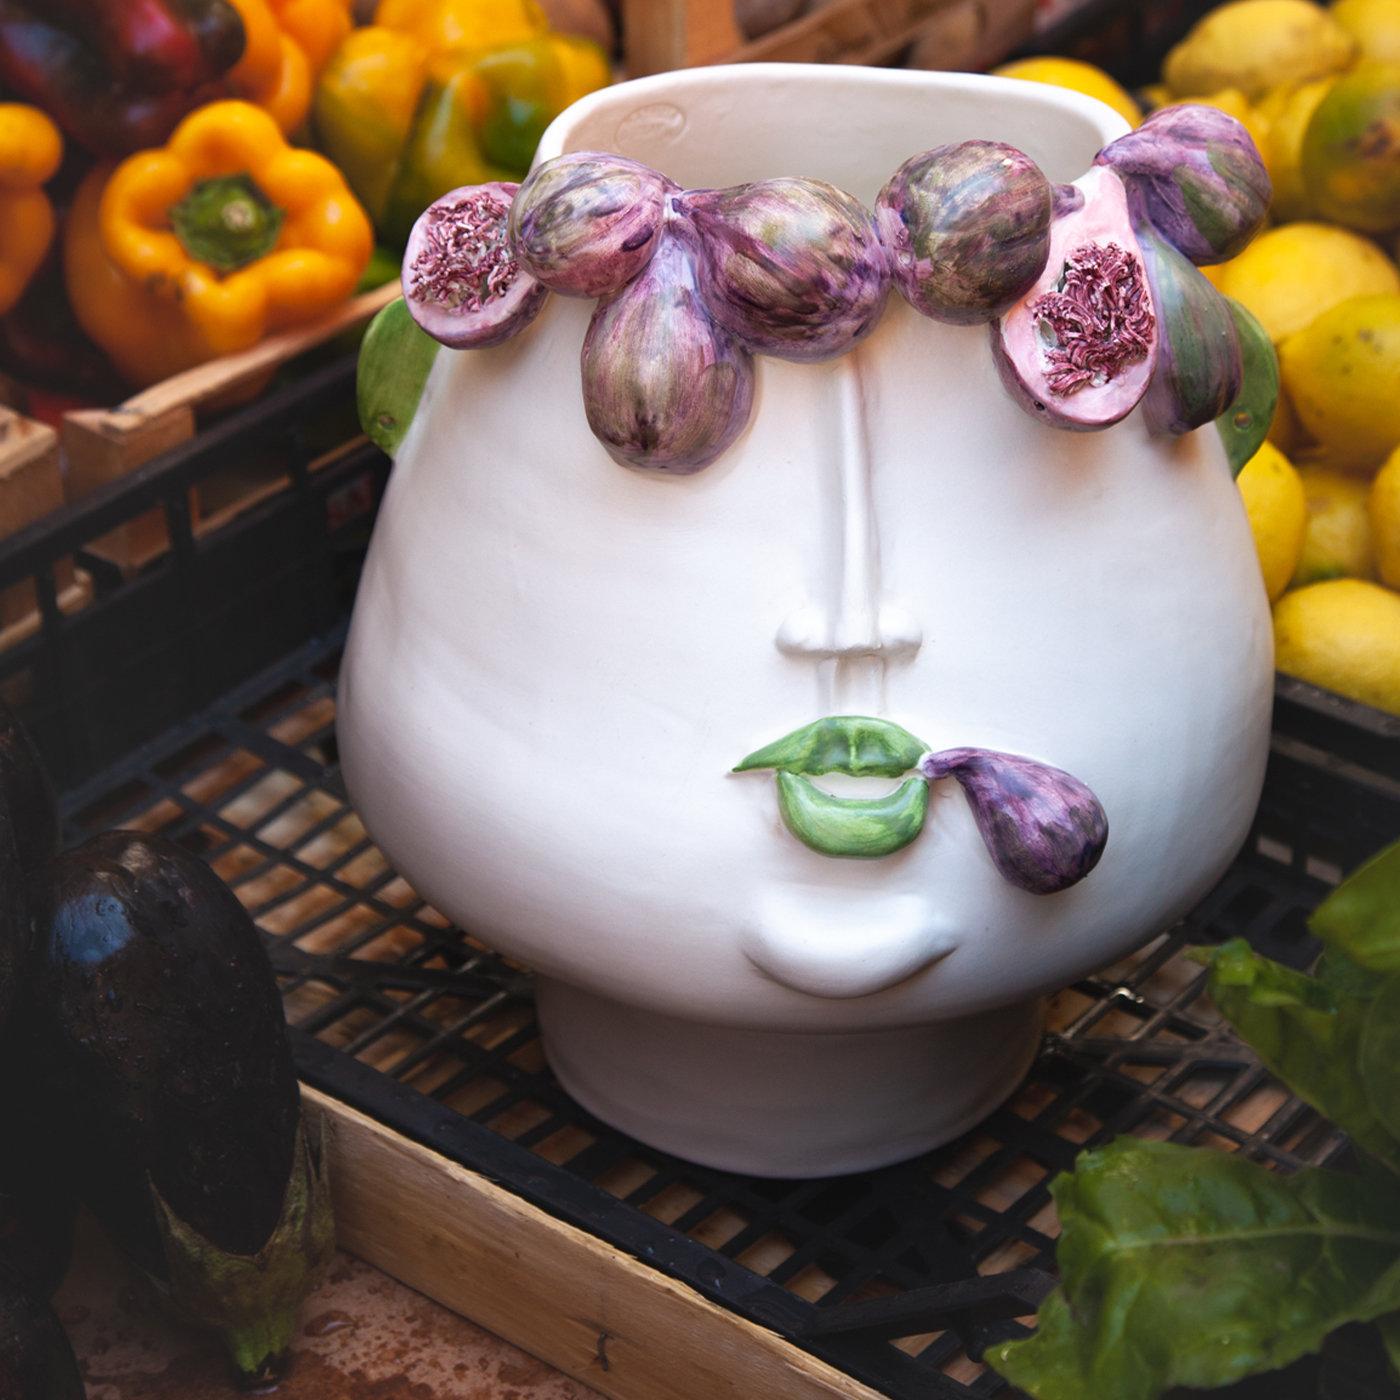 The display of this flattering handcrafted vase will bring a hint of Sicilian folklore into any refined indoor or outdoor context. Crafted of fine ceramic glazed in matte white, its anthropomorphic silhouette was inspired by a Sicilian street vendor